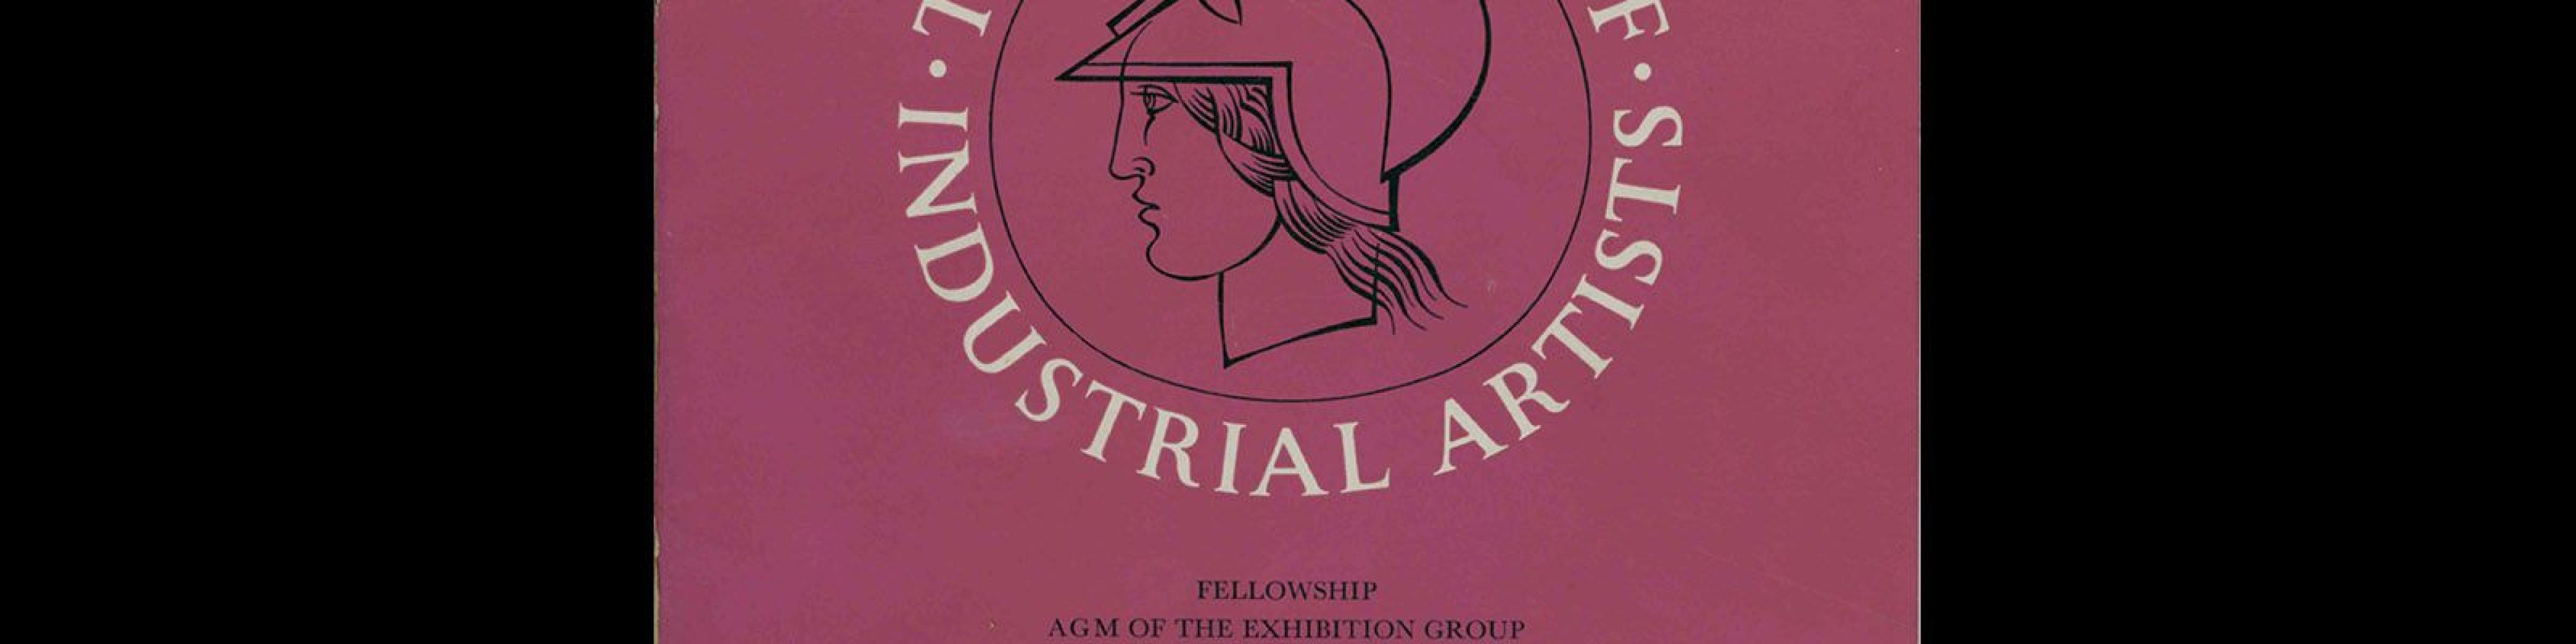 Society of Industrial Artists, 26, April 1952